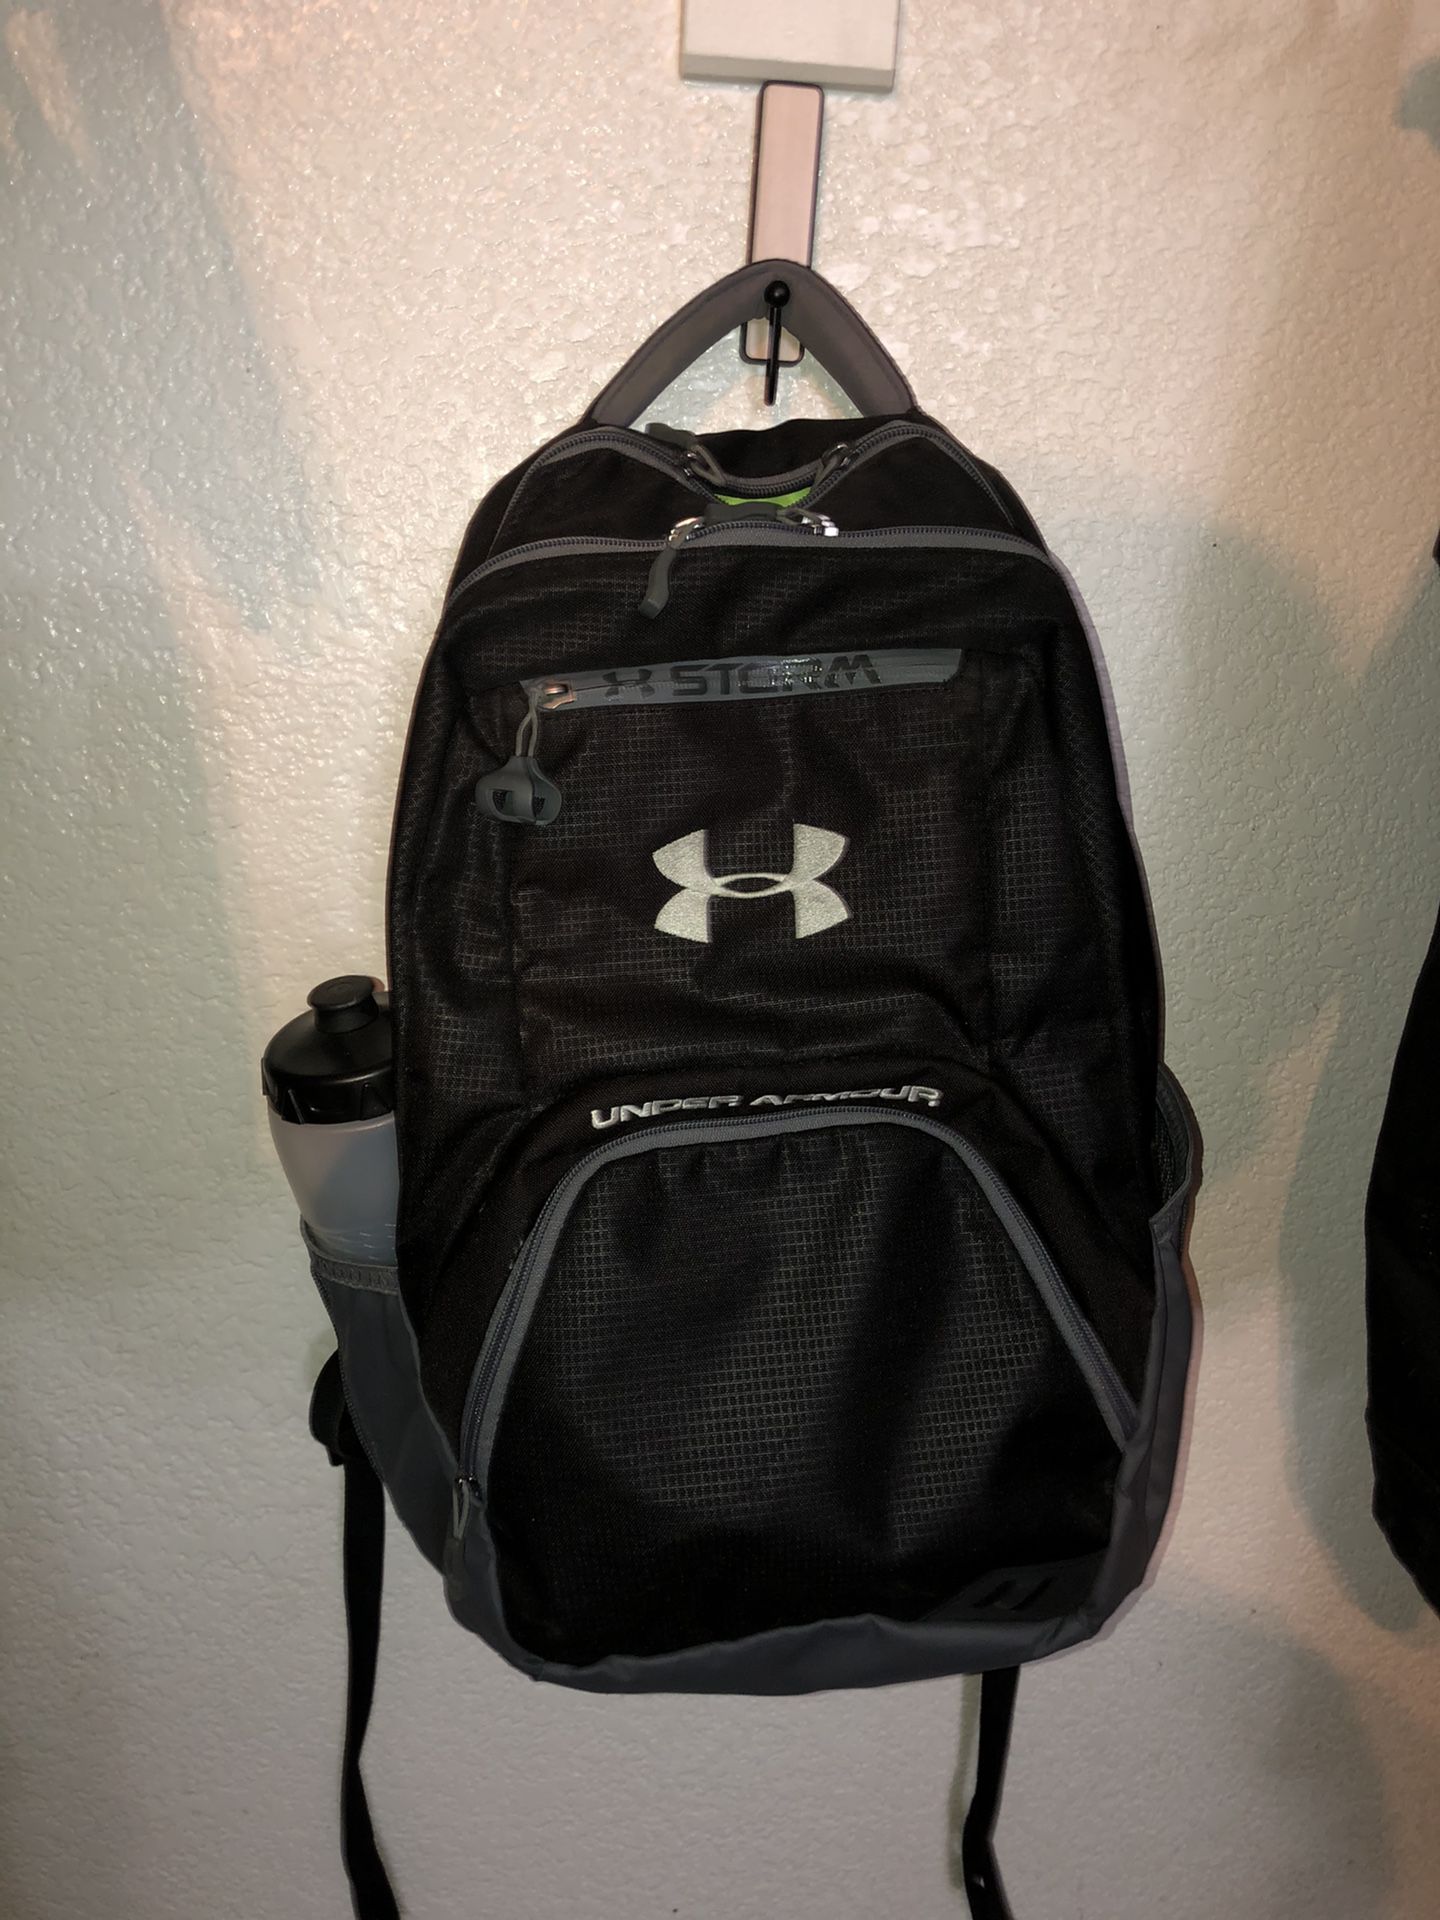 Underarmour storm Backpack and bottle